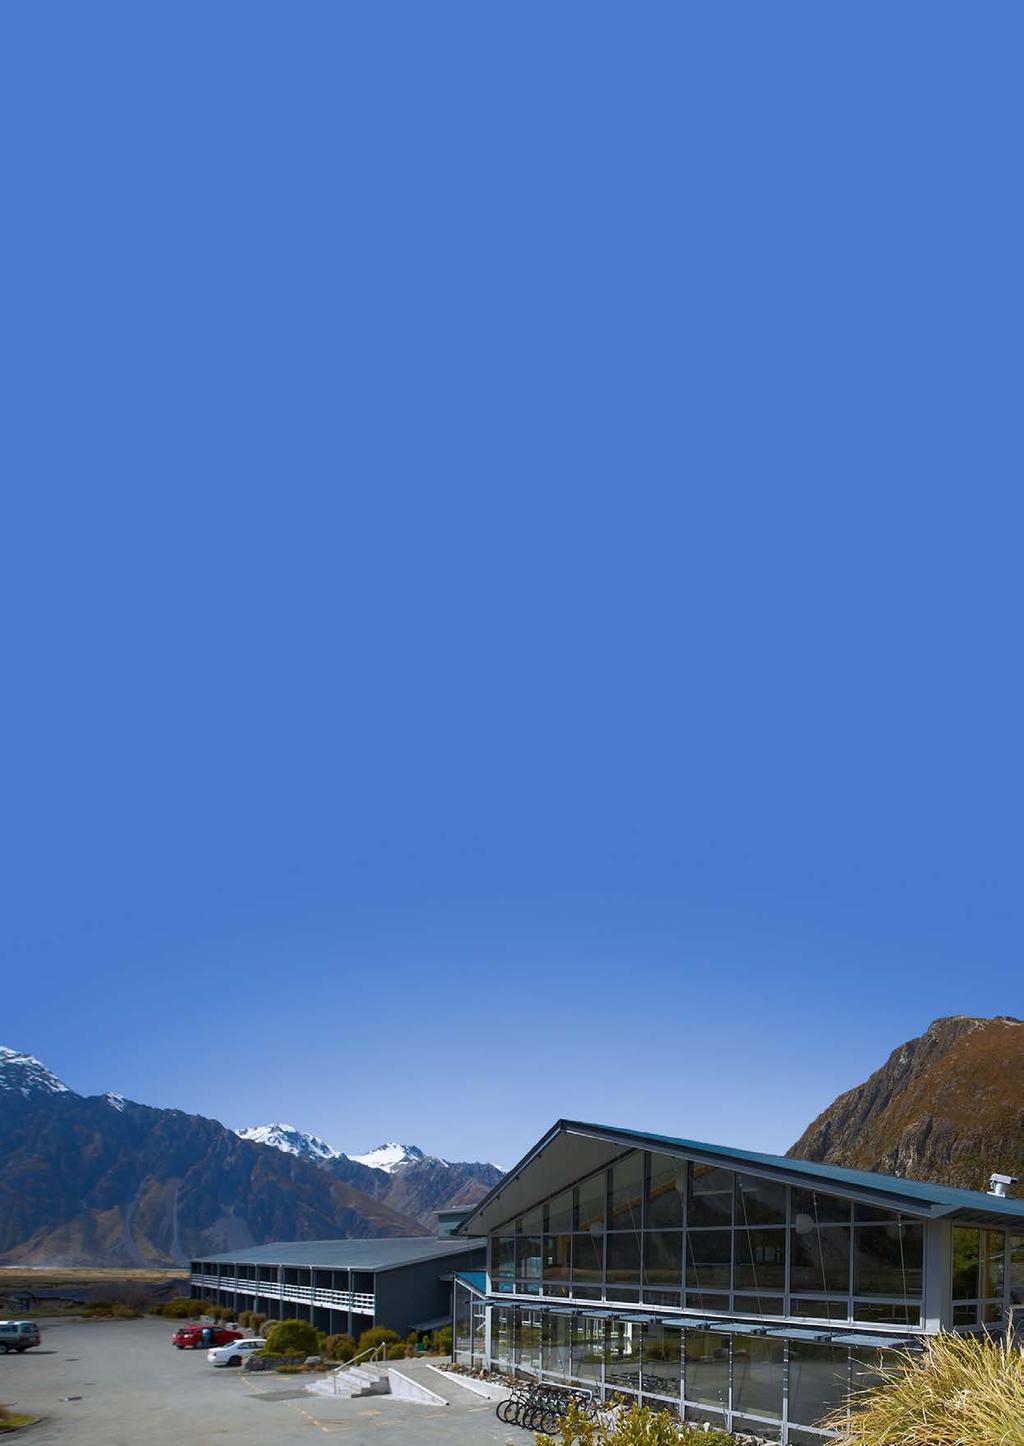 Mt Cook Lodge and Motels is located within Aoraki Mount Cook Alpine Village which has long been regarded as one of New Zealand s most breathtaking holiday destinations, located 322km south-west of